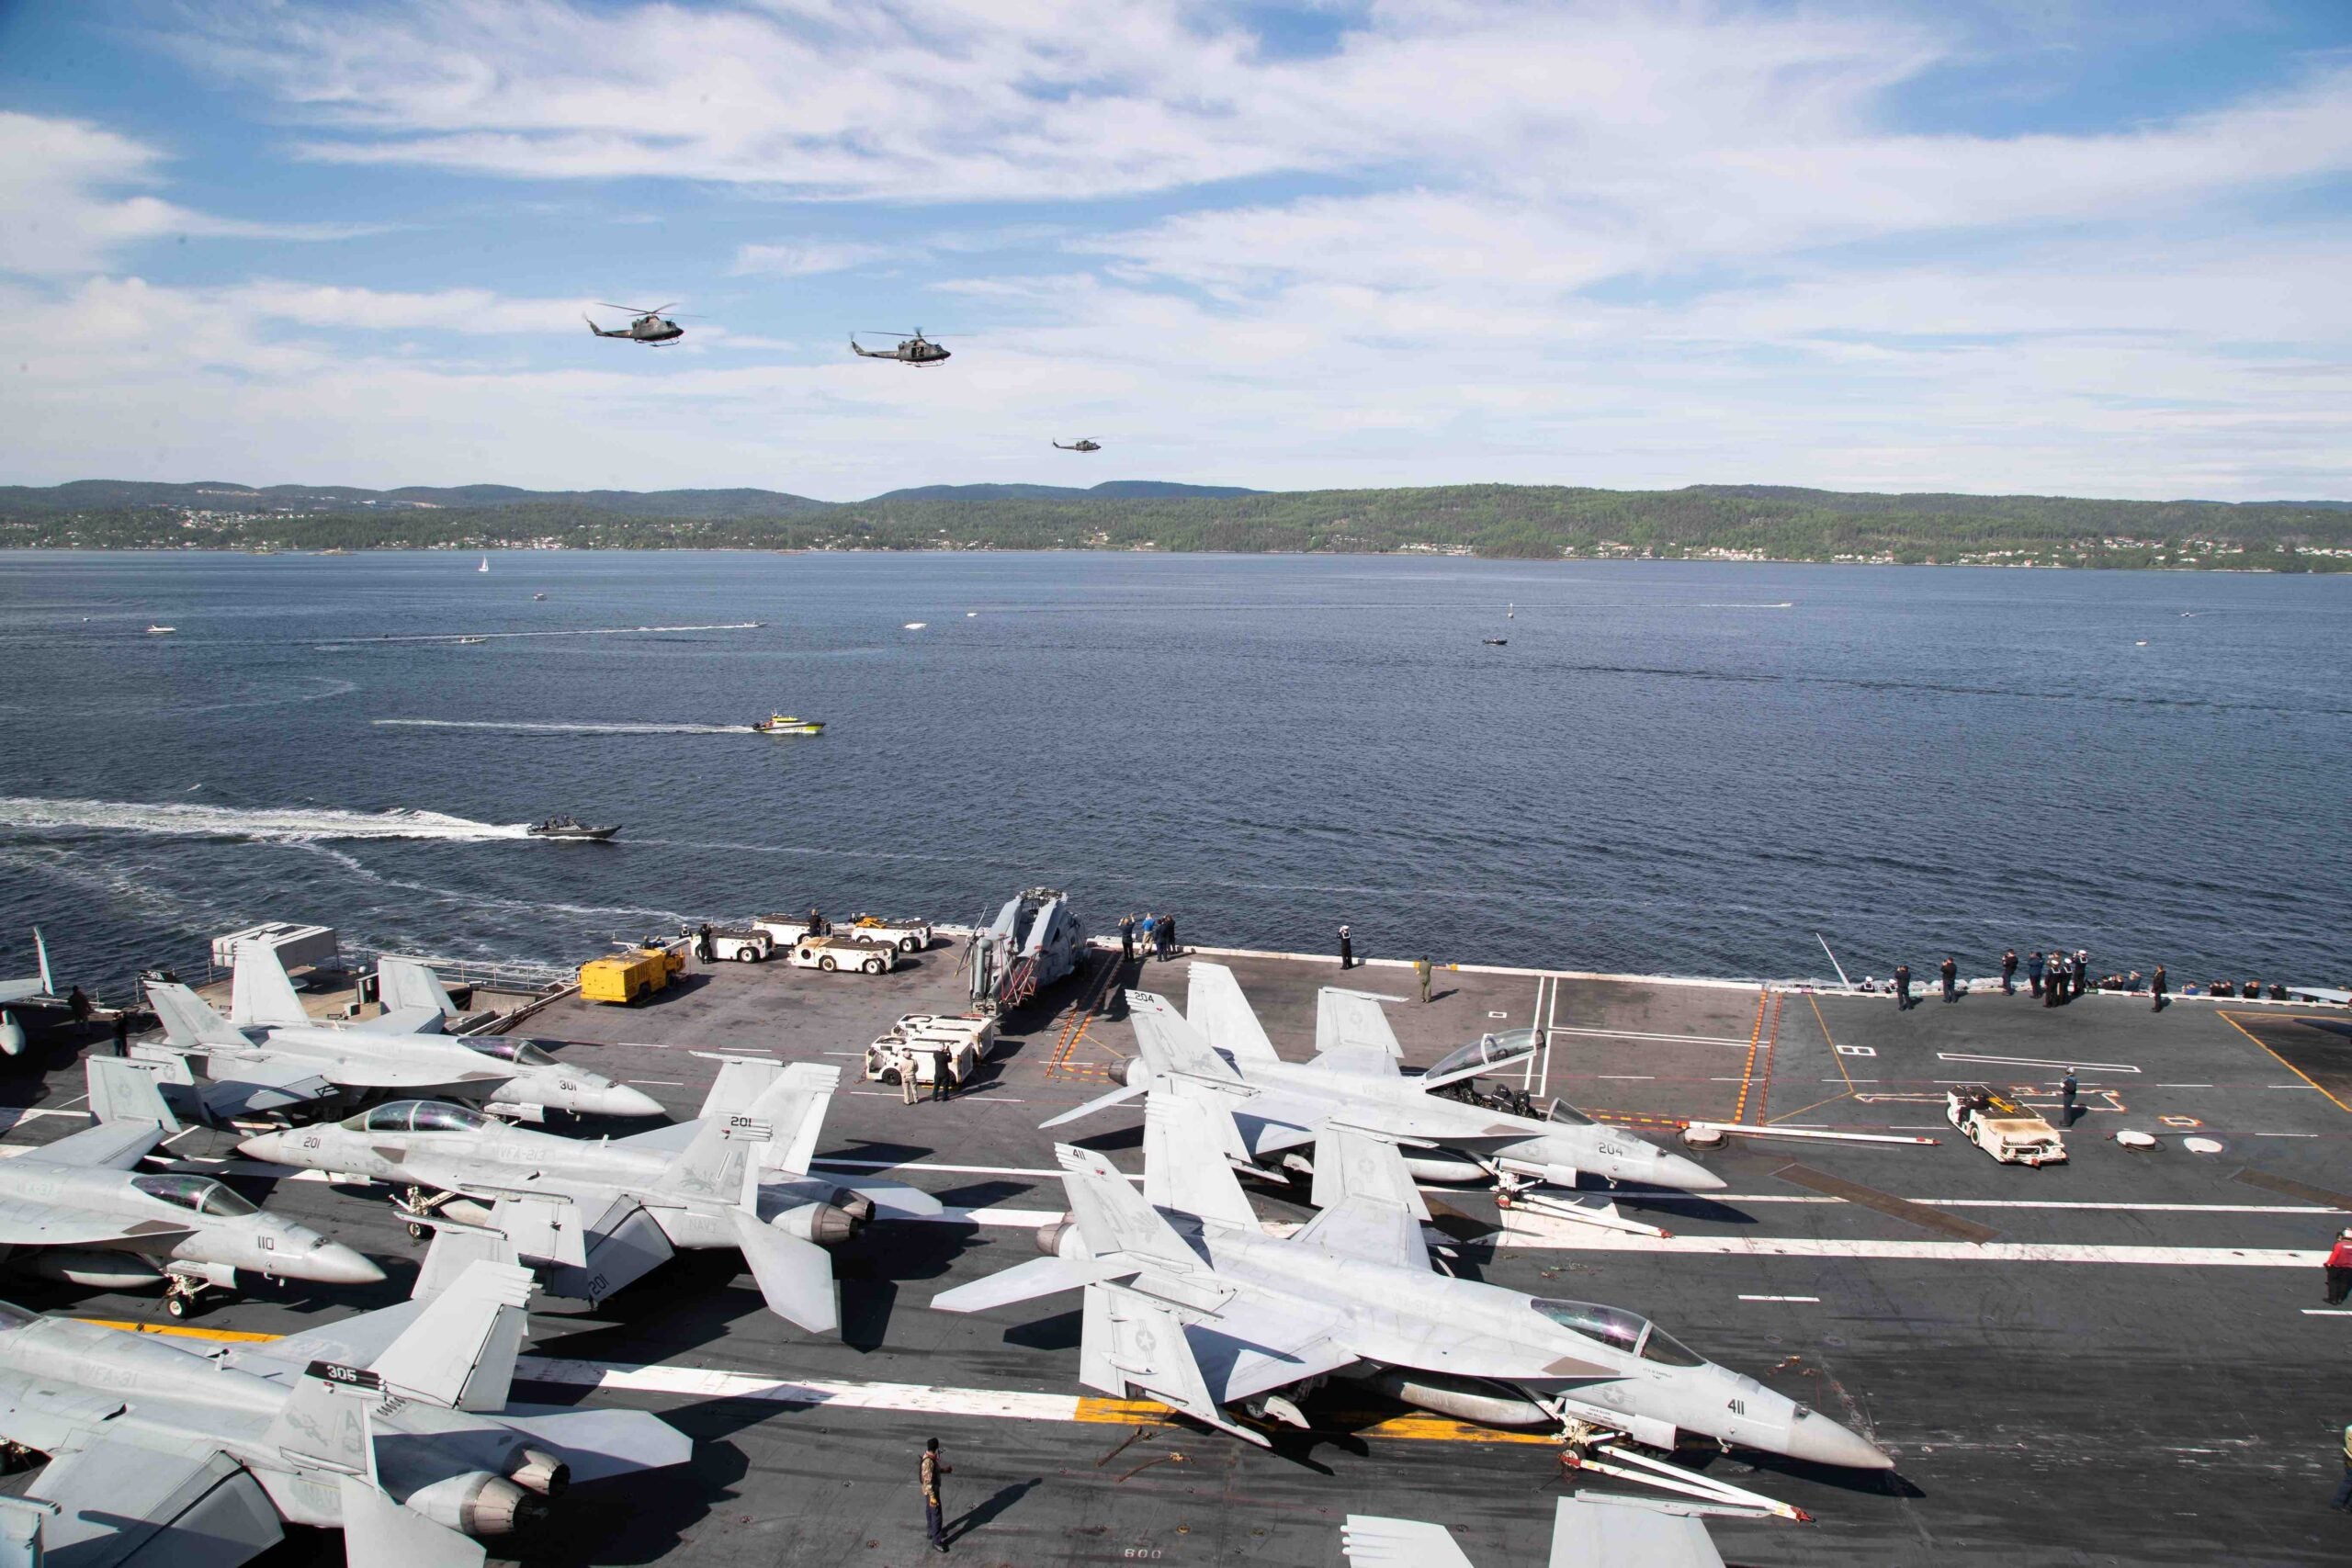 Three Norwegian military helicopters perform a fly-by of the flagship USS Gerald R. Ford (CVN 78) as the ship transits the Oslo fjord for its first port call in Oslo, Norway, May 24, 2023. Gerald R. Ford is the first U.S. aircraft carrier to pull into Norway in more than 65 years. Gerald R. Ford is the U.S. Navy’s newest and most advanced aircraft carrier, representing a generational leap in the in the U.S. Navy’s capacity to project power on a global scale. The Gerald R. Ford Strike Group is on a scheduled deployment in the U.S. Naval Forces Europe area of operations, employed by U.S. Sixth Fleet to defend U.S., allied, and partner interest. (US Navy Photo by Mass Communication Specialist 2nd Class Brian Glunt) Released